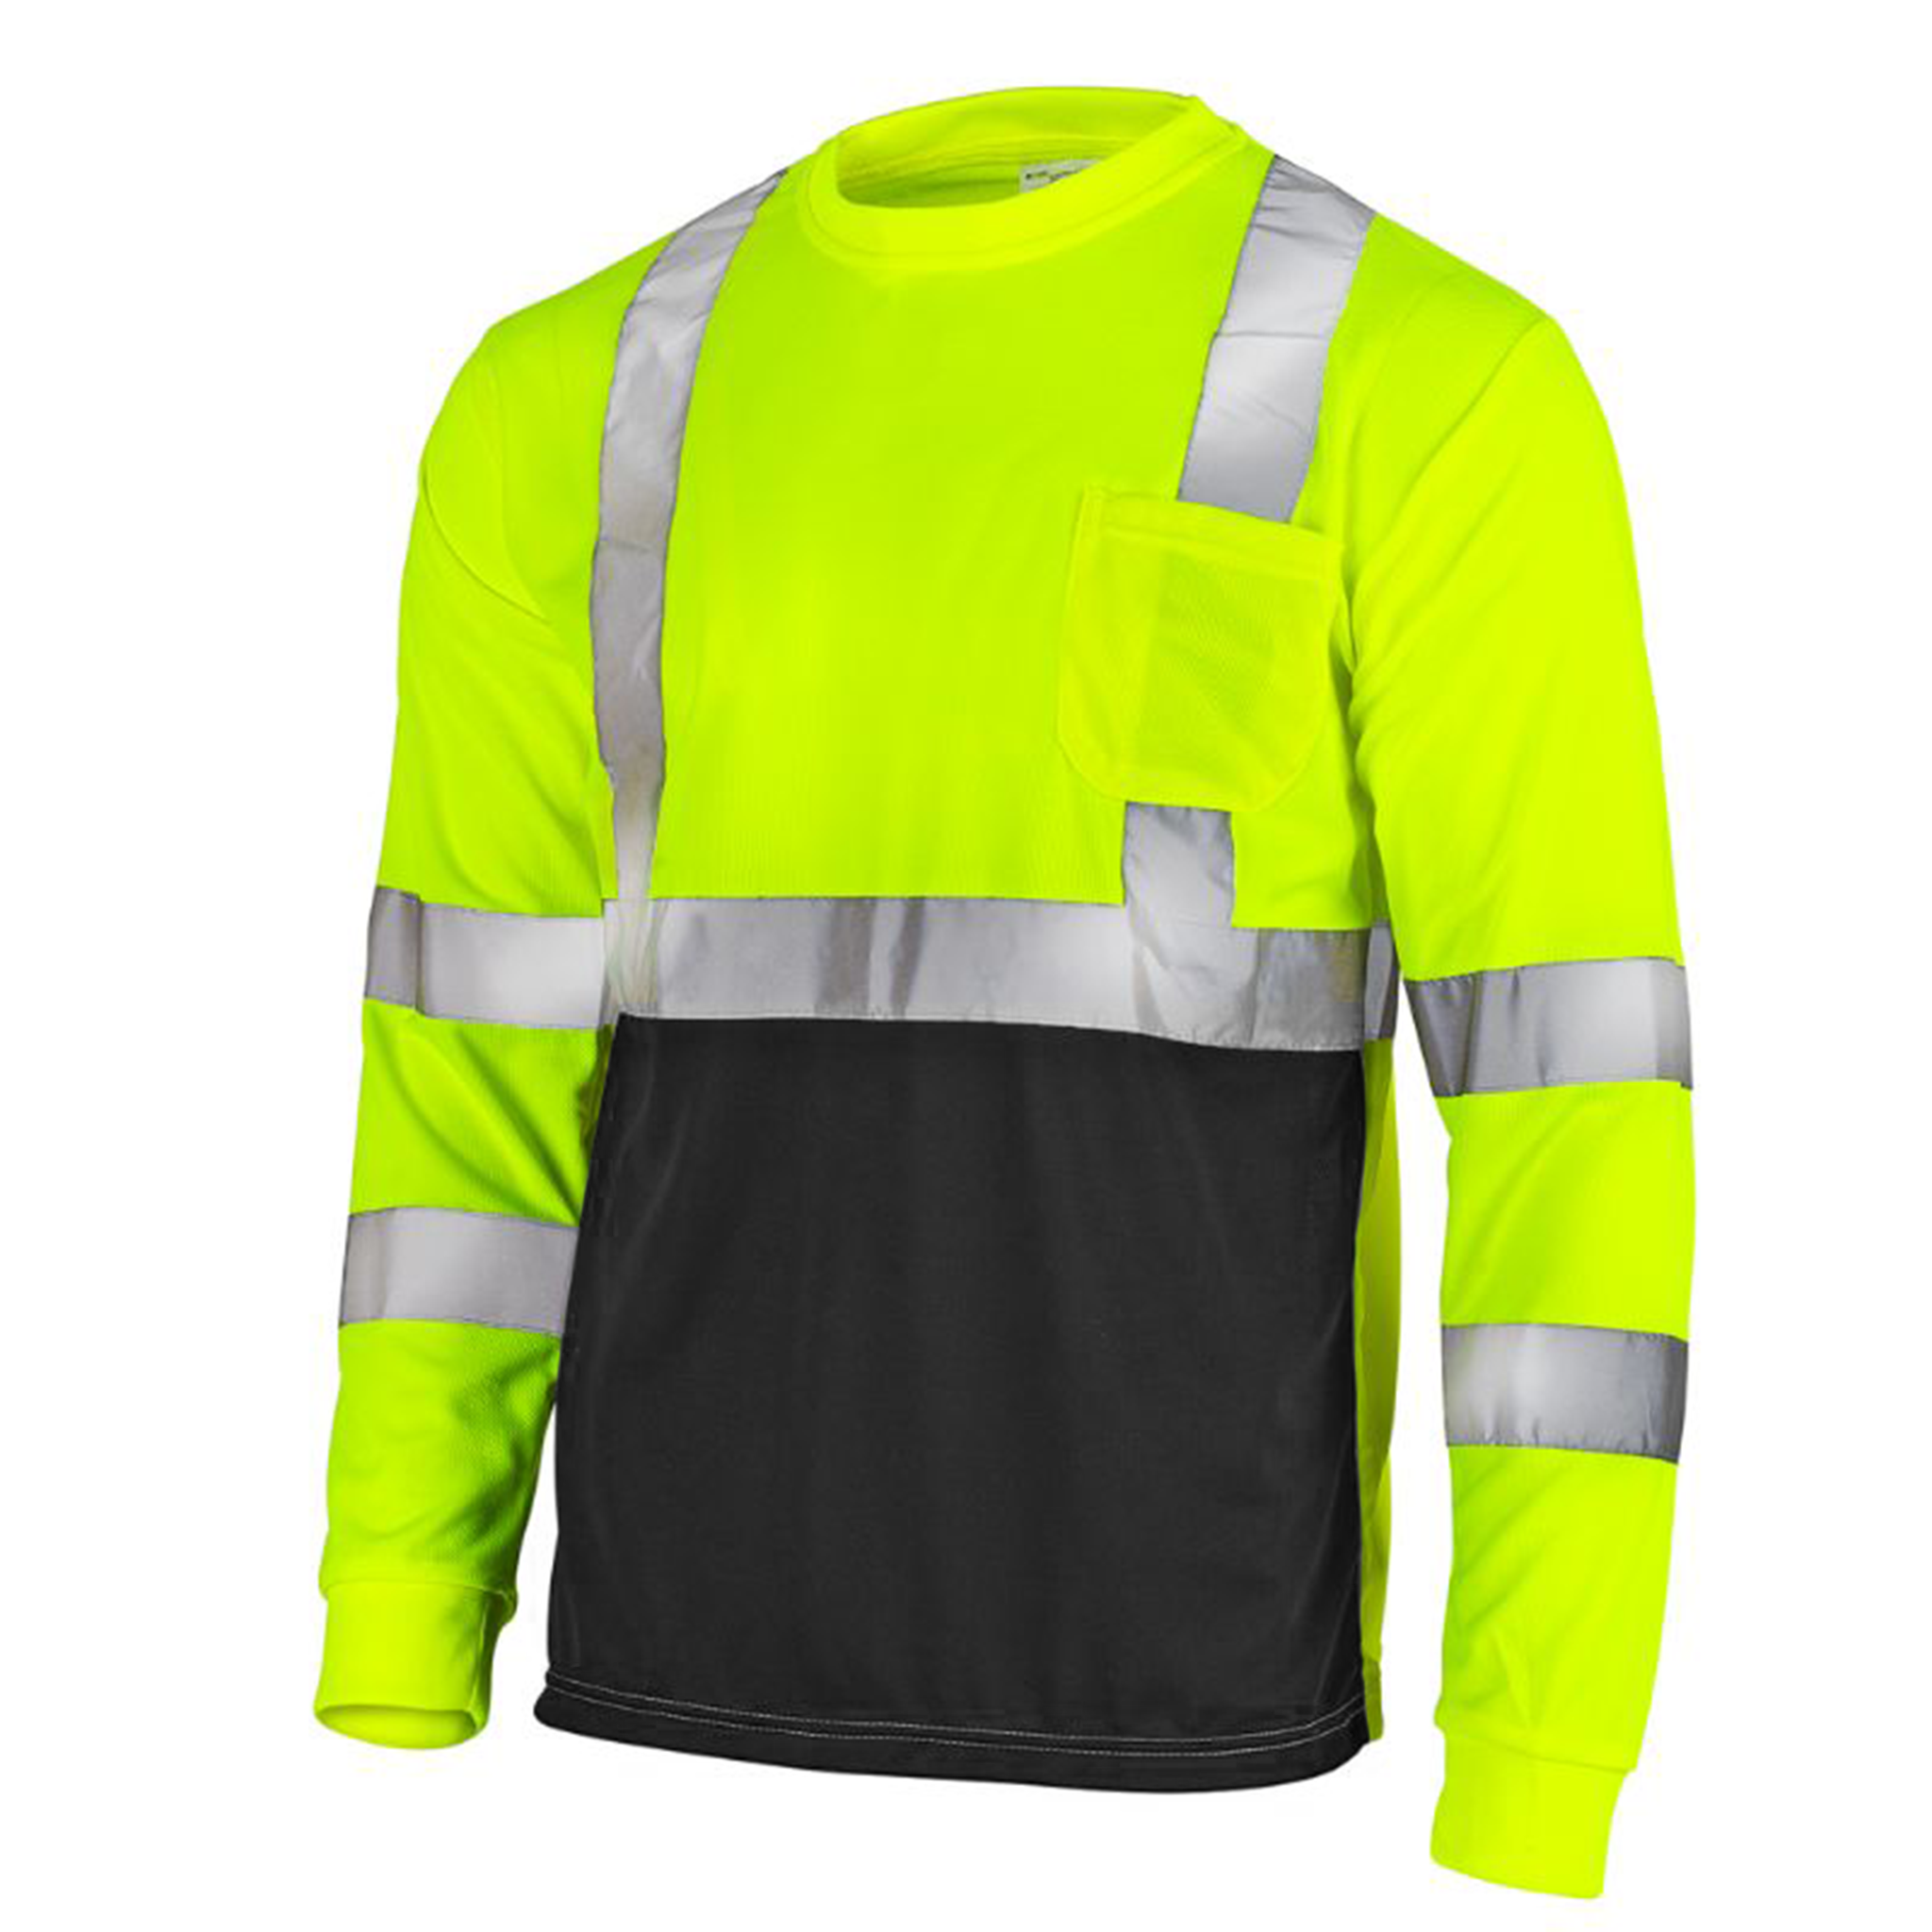 Two-Toned High Visibility Safety Shirt